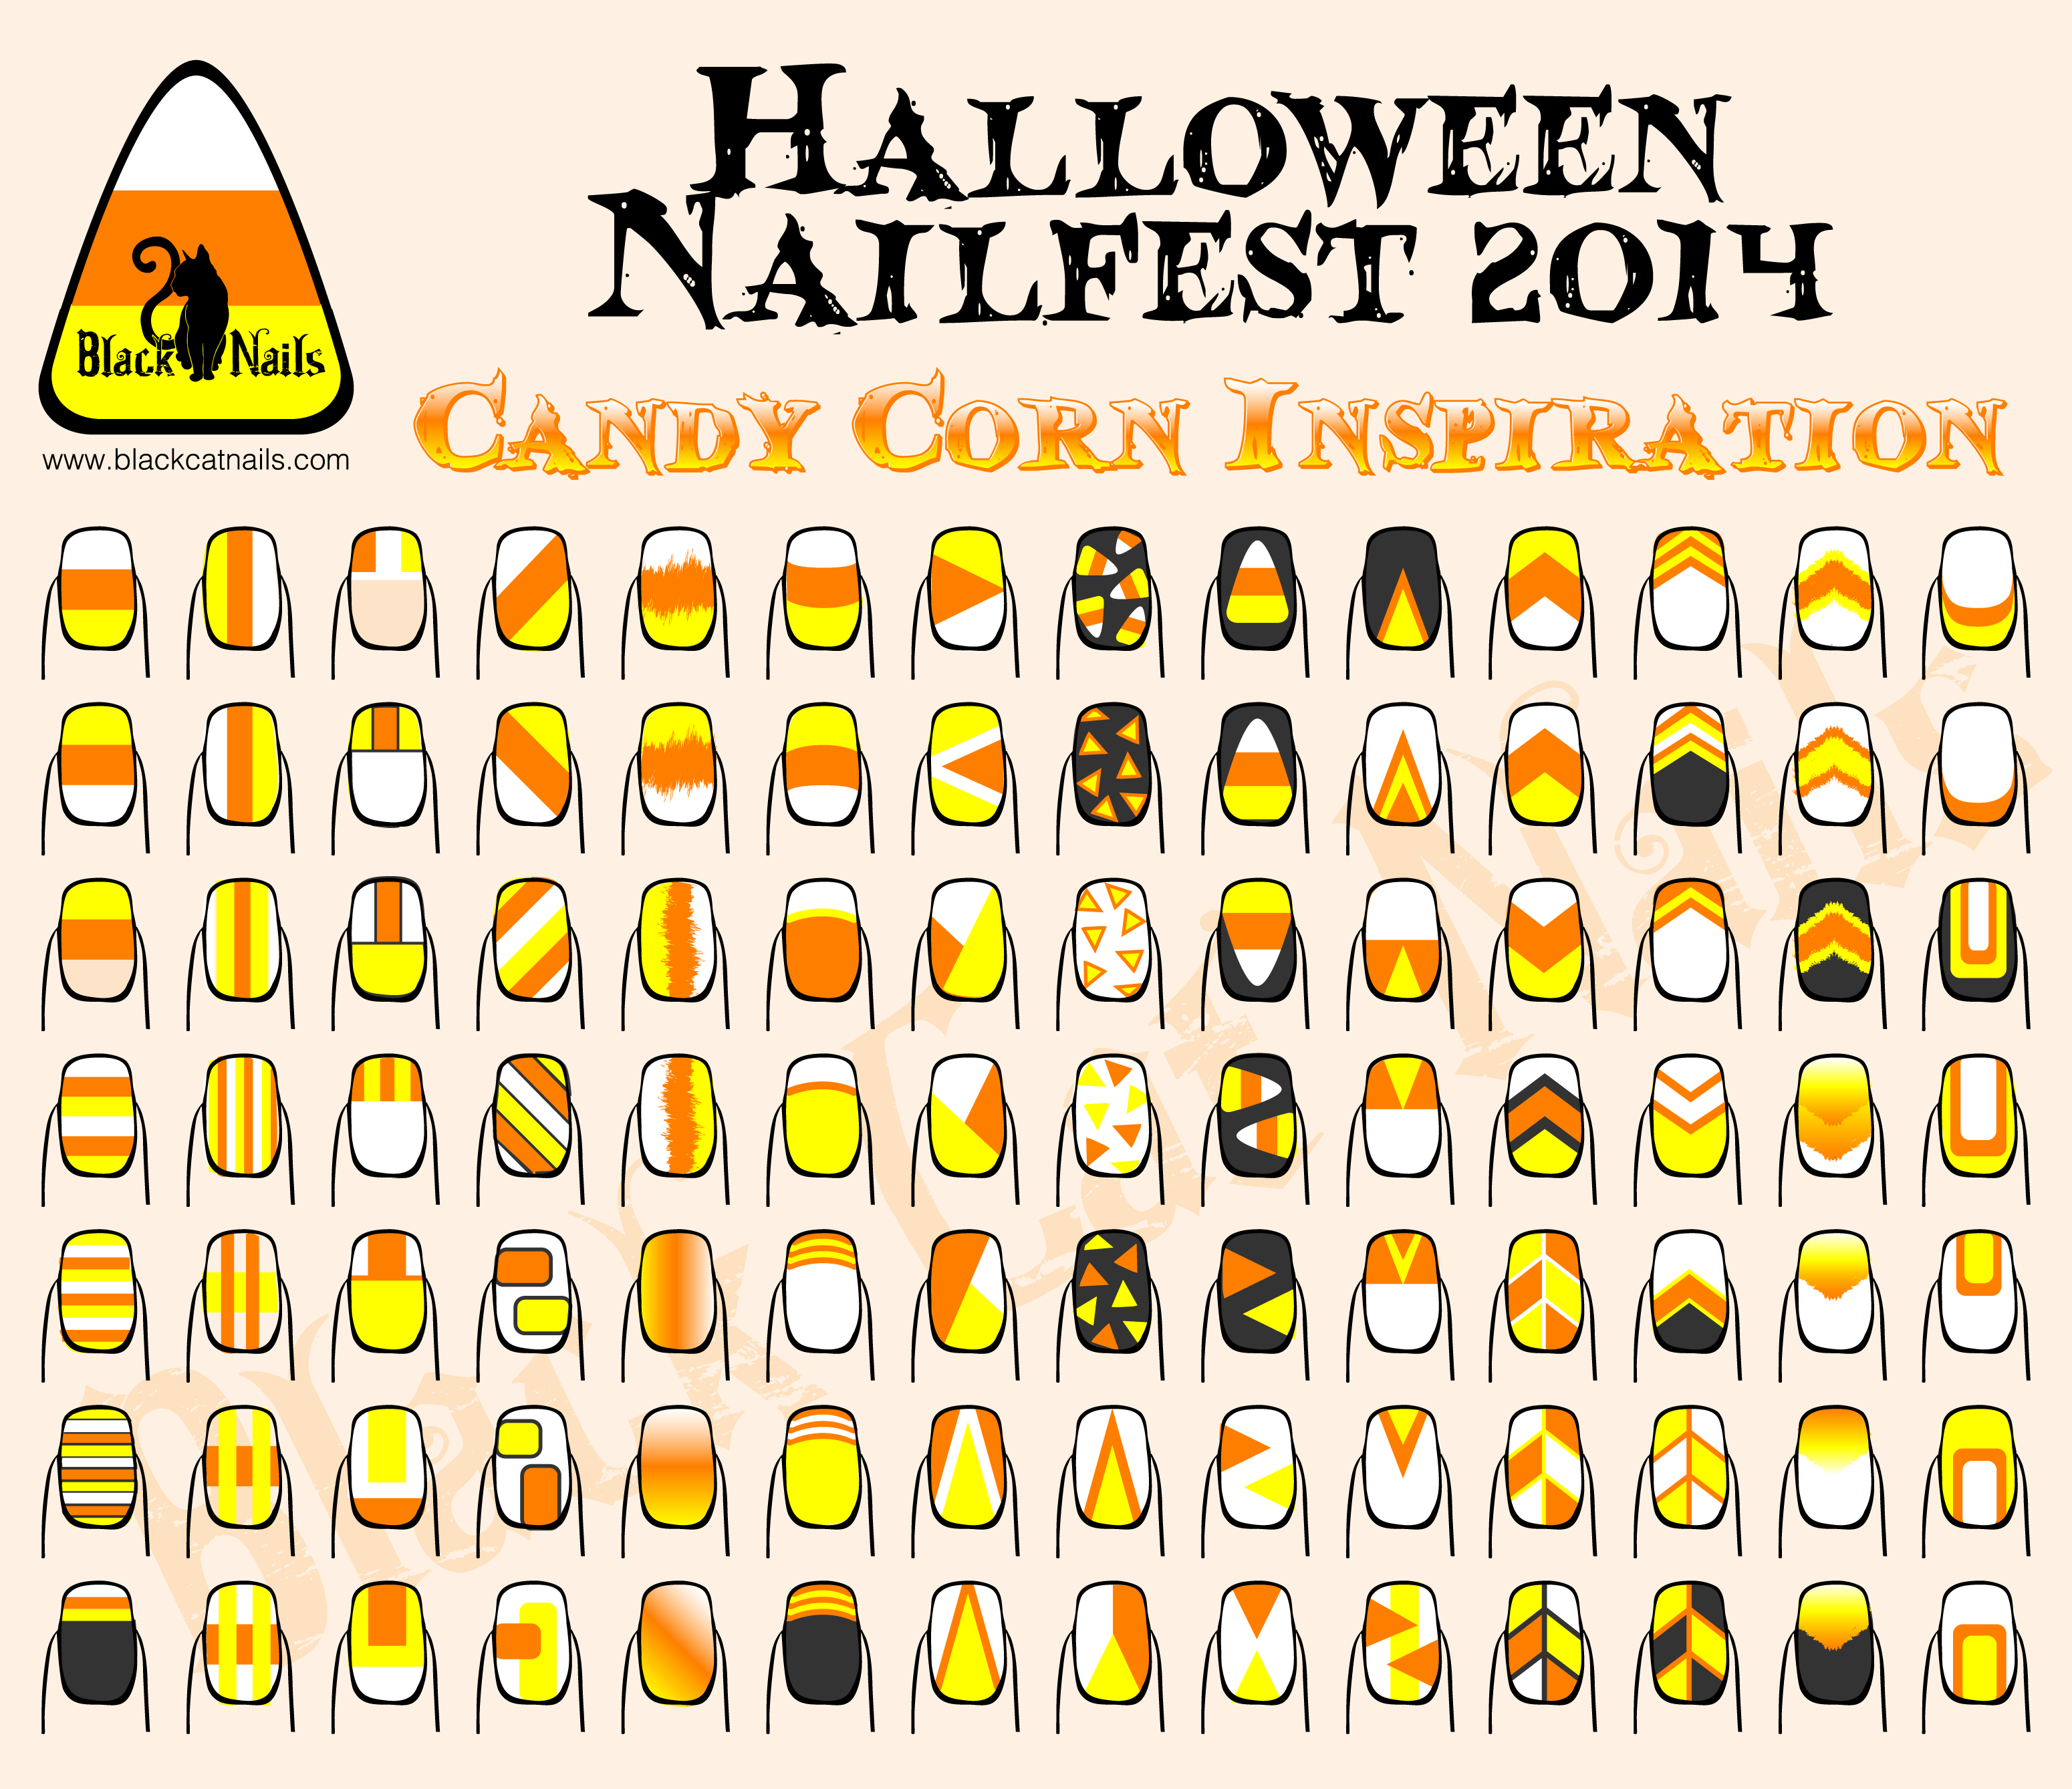 Candy Corn Inspired Nail Designs - Halloween Nailfest 2014 ...